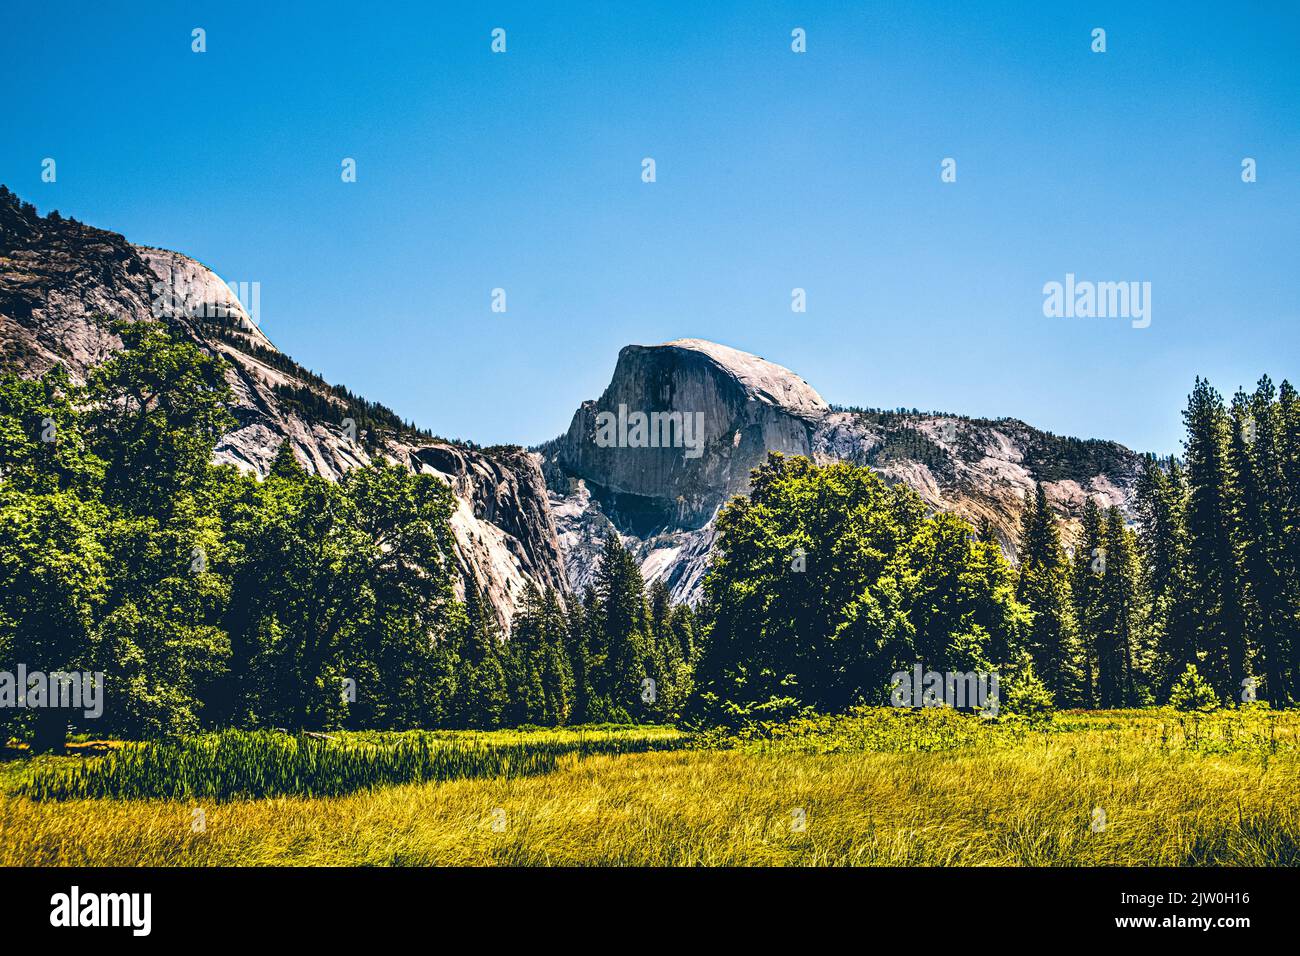 Distant view of the Half Dome inside Yosemite National Park, California. The Half Dome is a beautiful and popular landmark inside the national park. Stock Photo